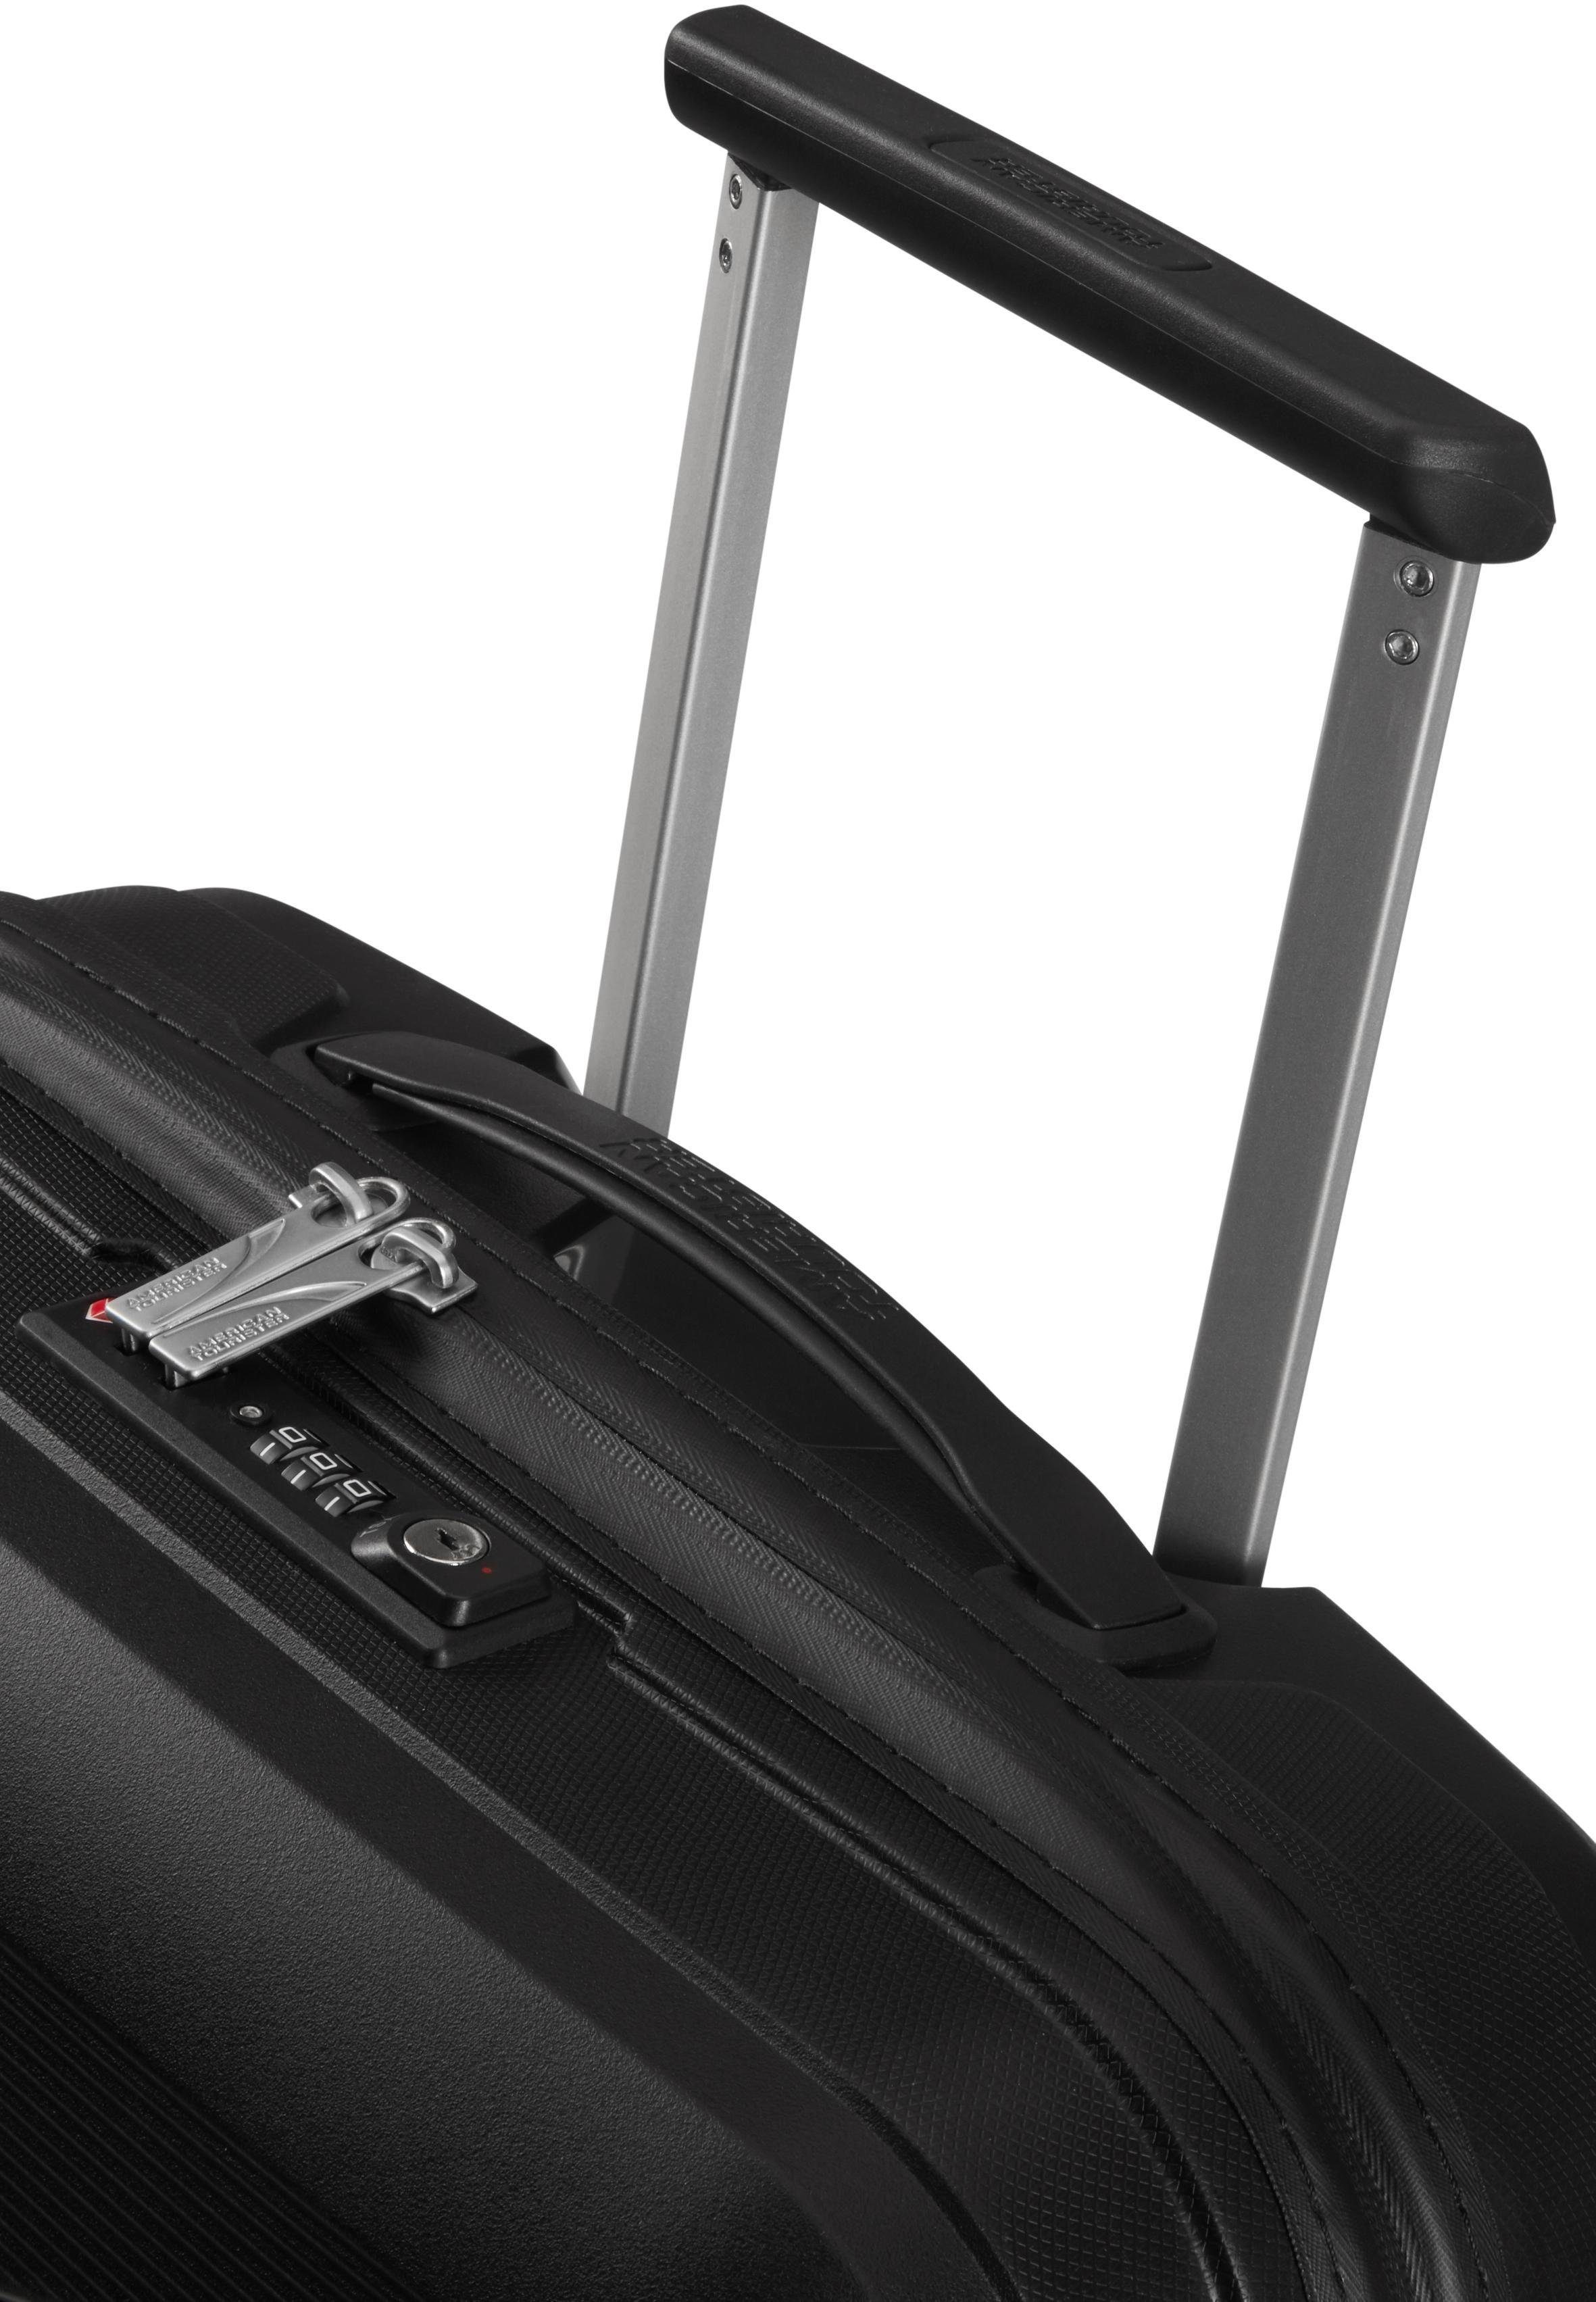 55, Black Onyx 4 AIRCONIC American Tourister® Koffer Rollen Spinner